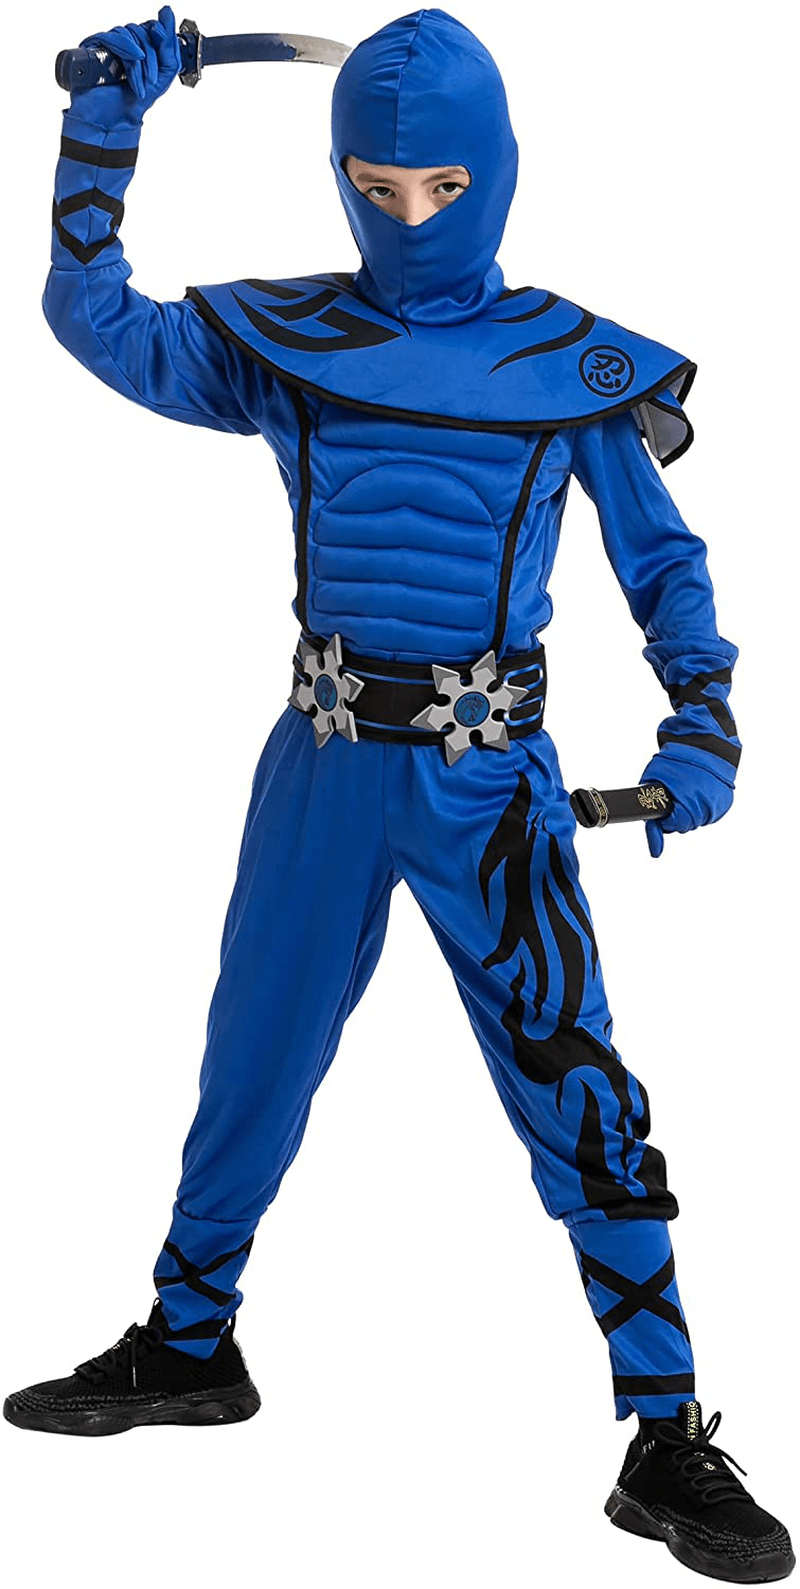 Blue Kungfu Ninja Costume for Boys and Girls, Halloween Dress Up Party, Ninja Role Playing, Themed Parties, Everyday Play